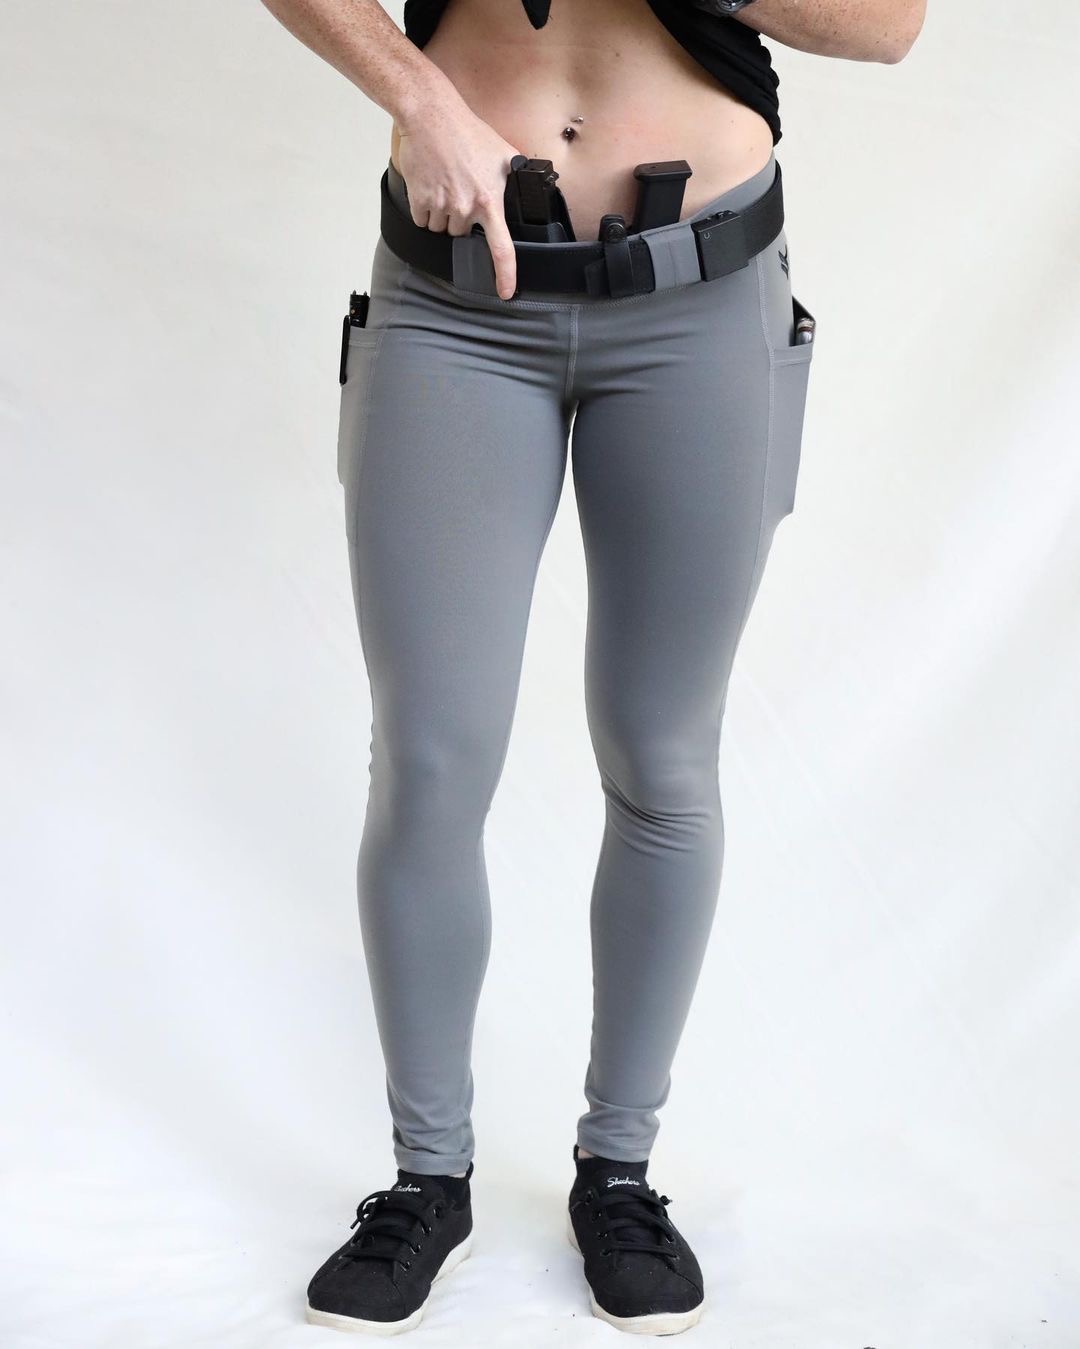 Tactical Leggings Concealed Carry-on